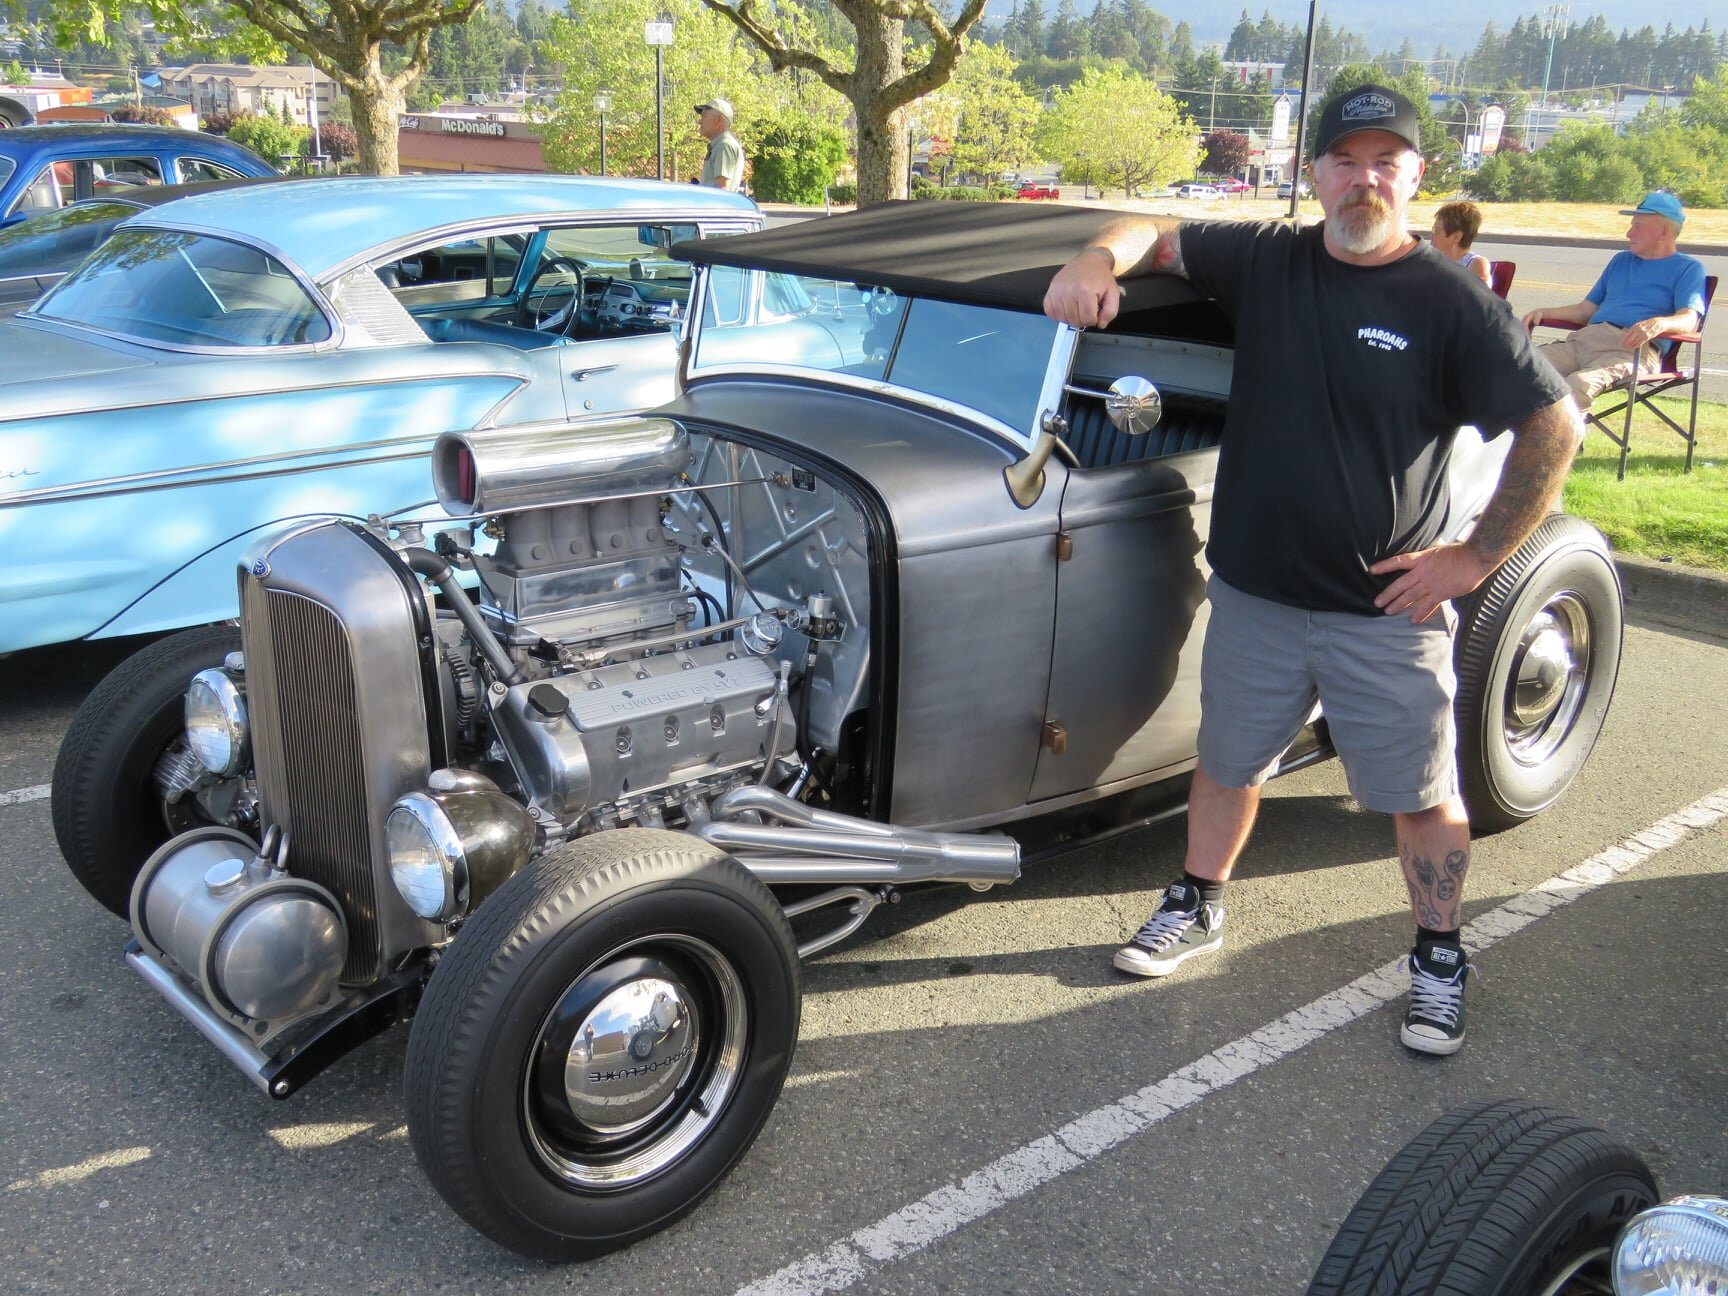 Vancouver Island Hot Rods photo